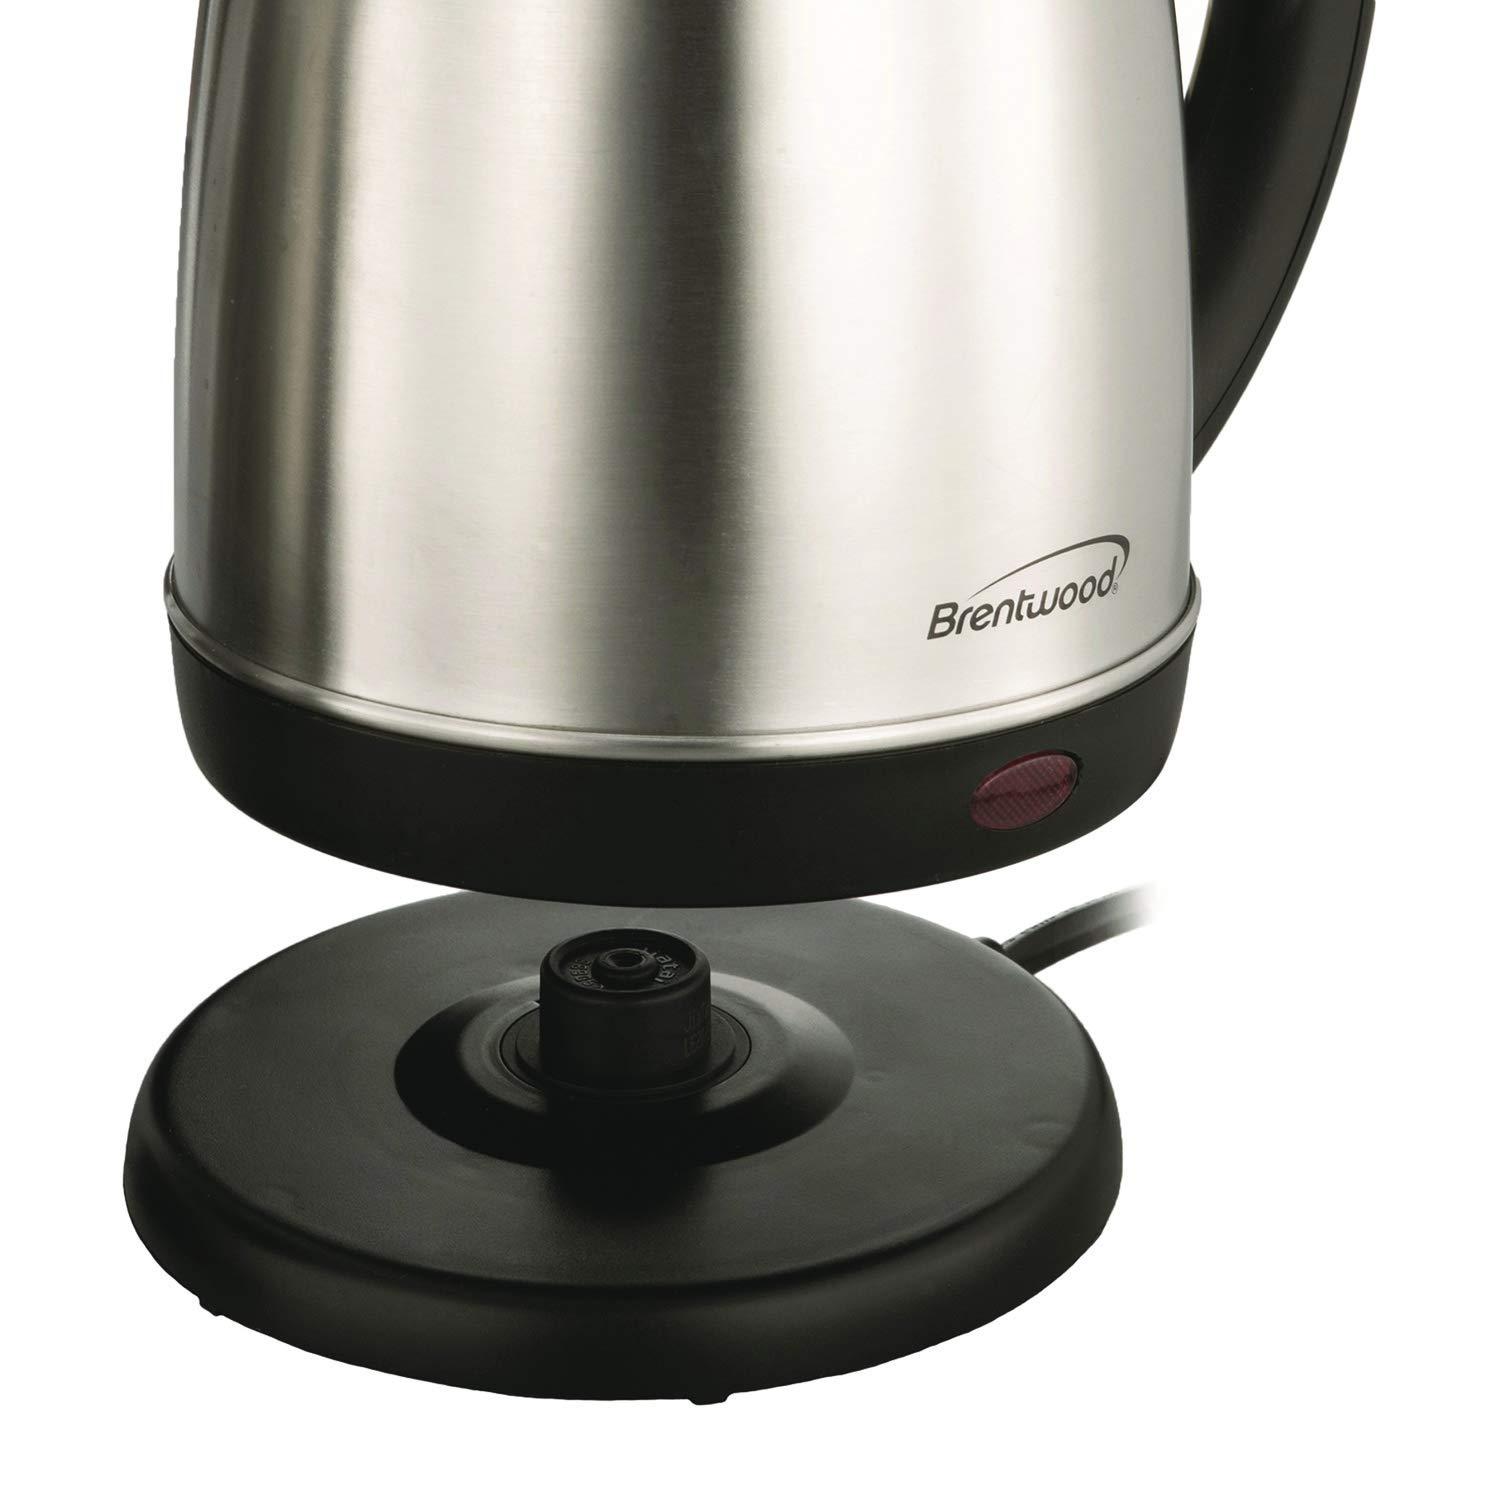 BRENTWOOD® KT-1780 1.5-LITER STAINLESS STEEL CORDLESS ELECTRIC KETTLE (Silver/Black)